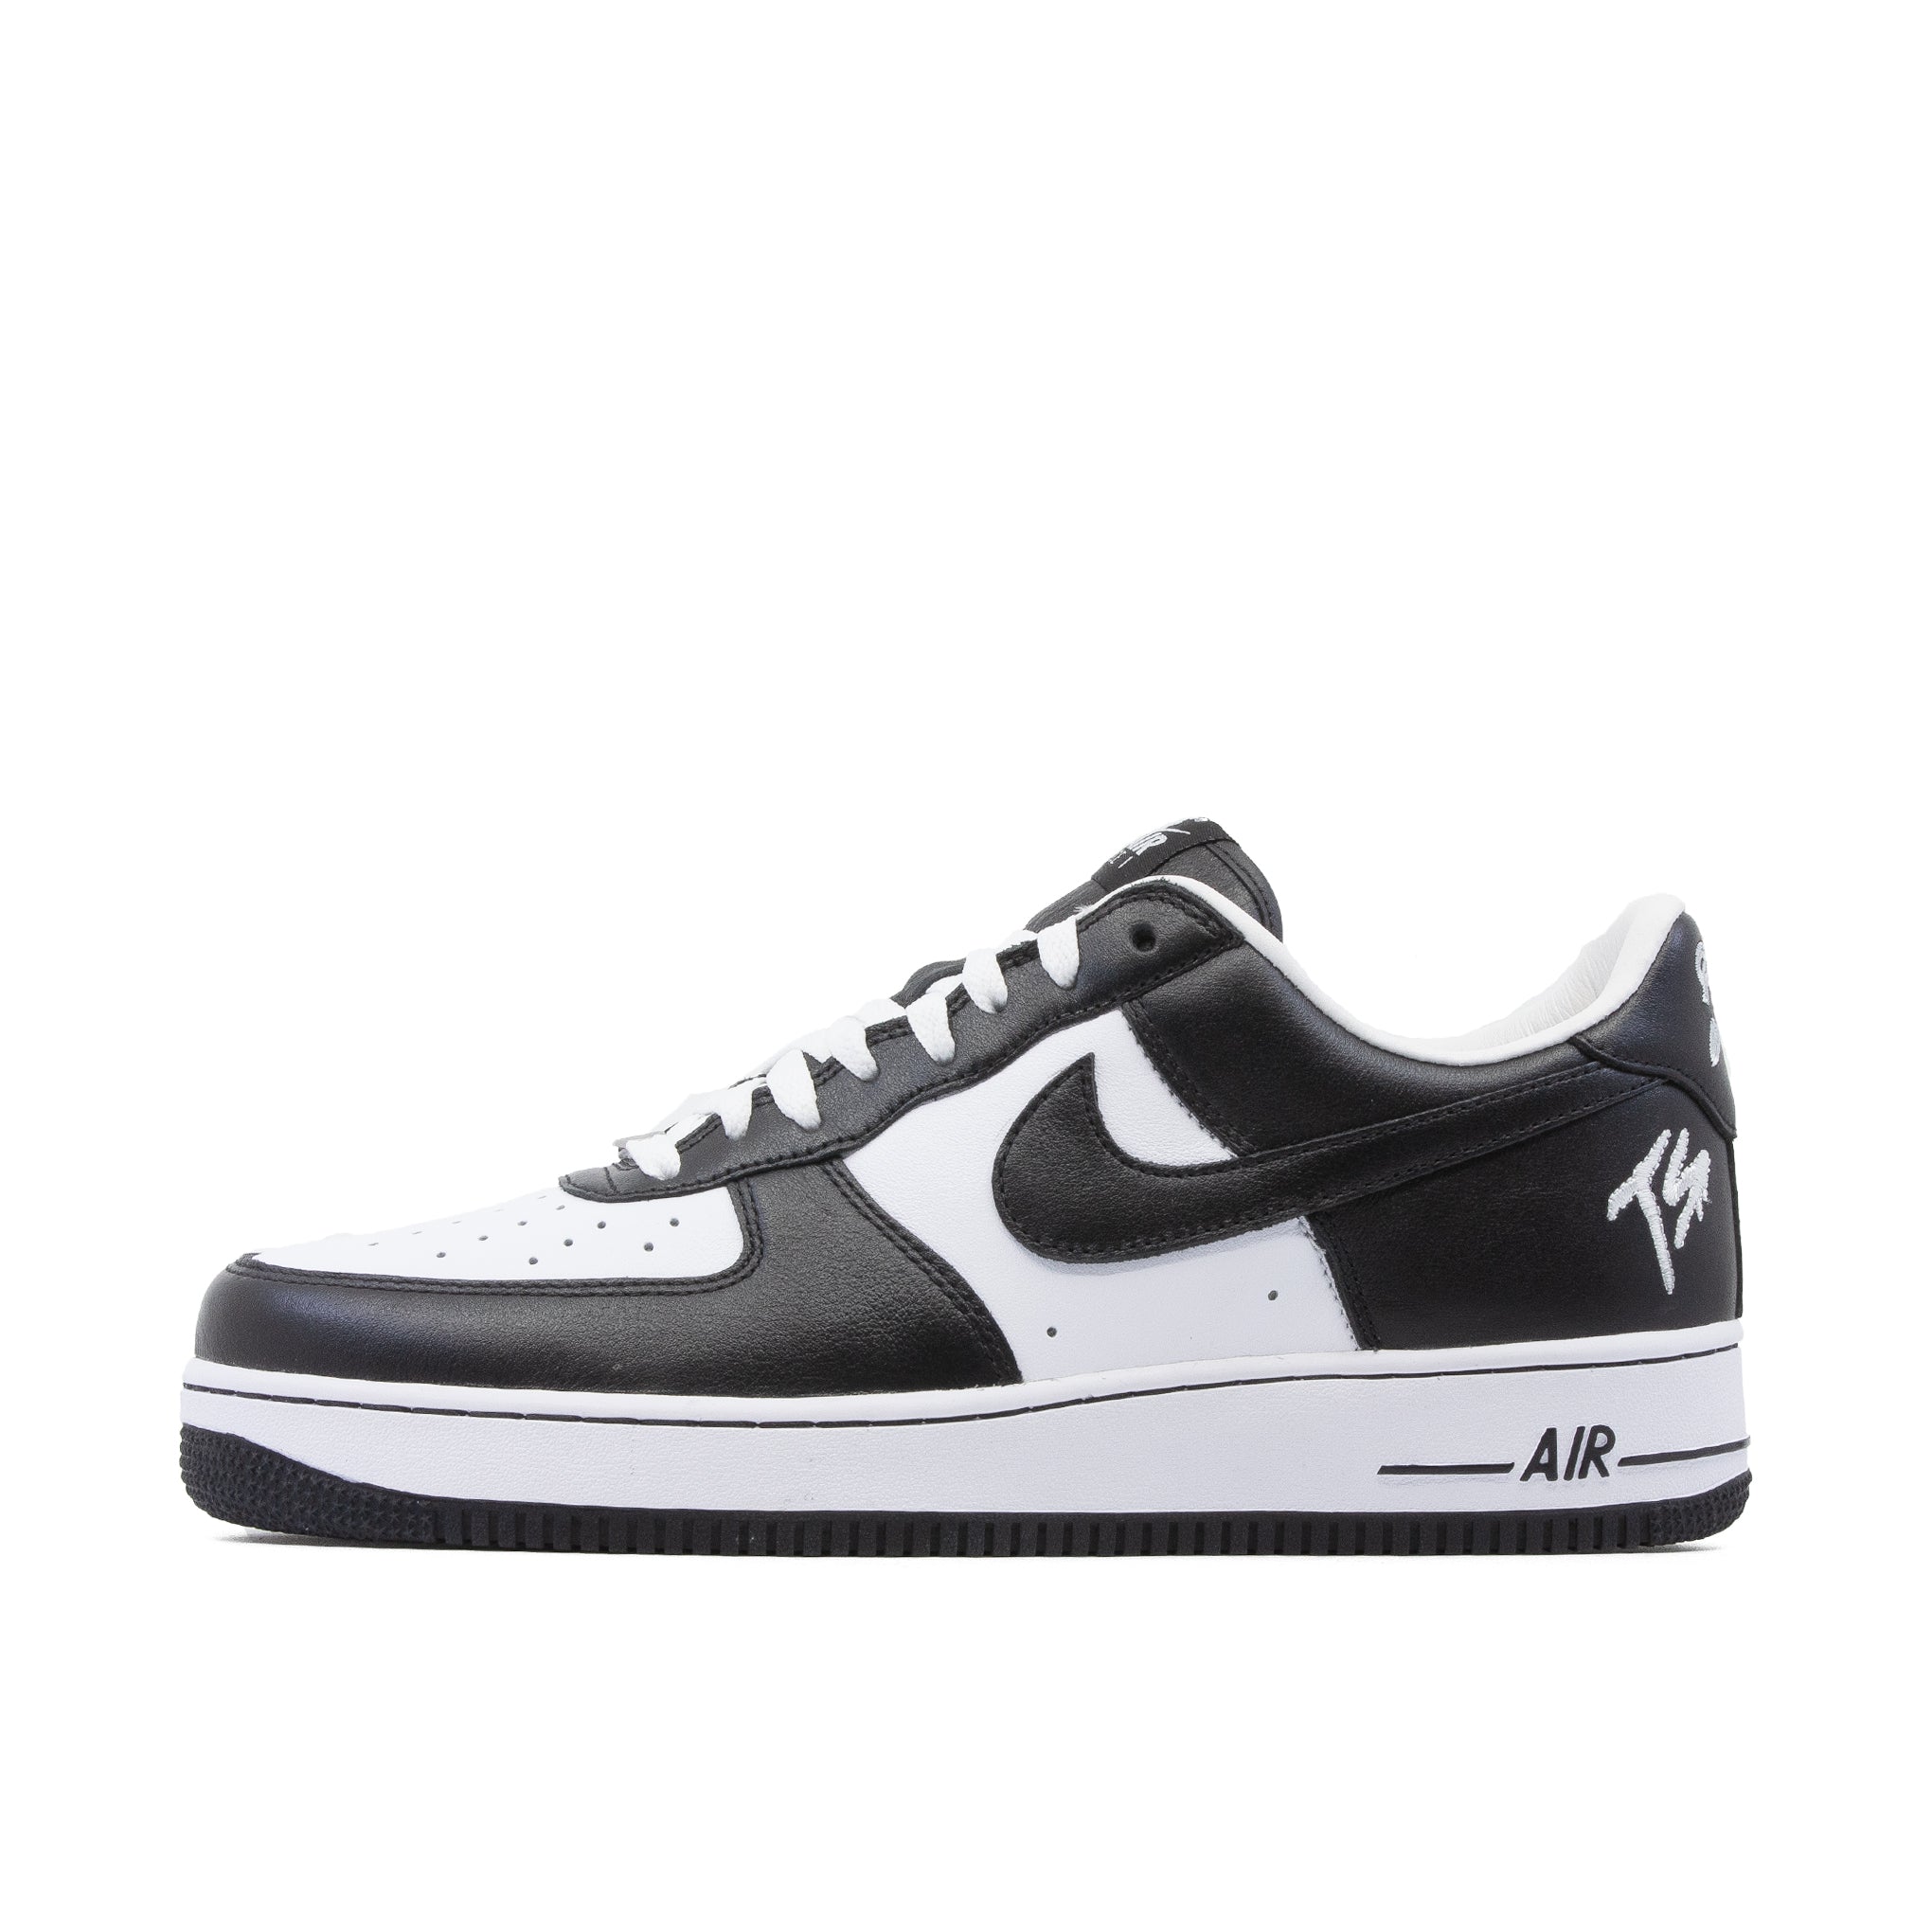 NIKE AIR FORCE 1 LOW TERROR SQUAD 停电